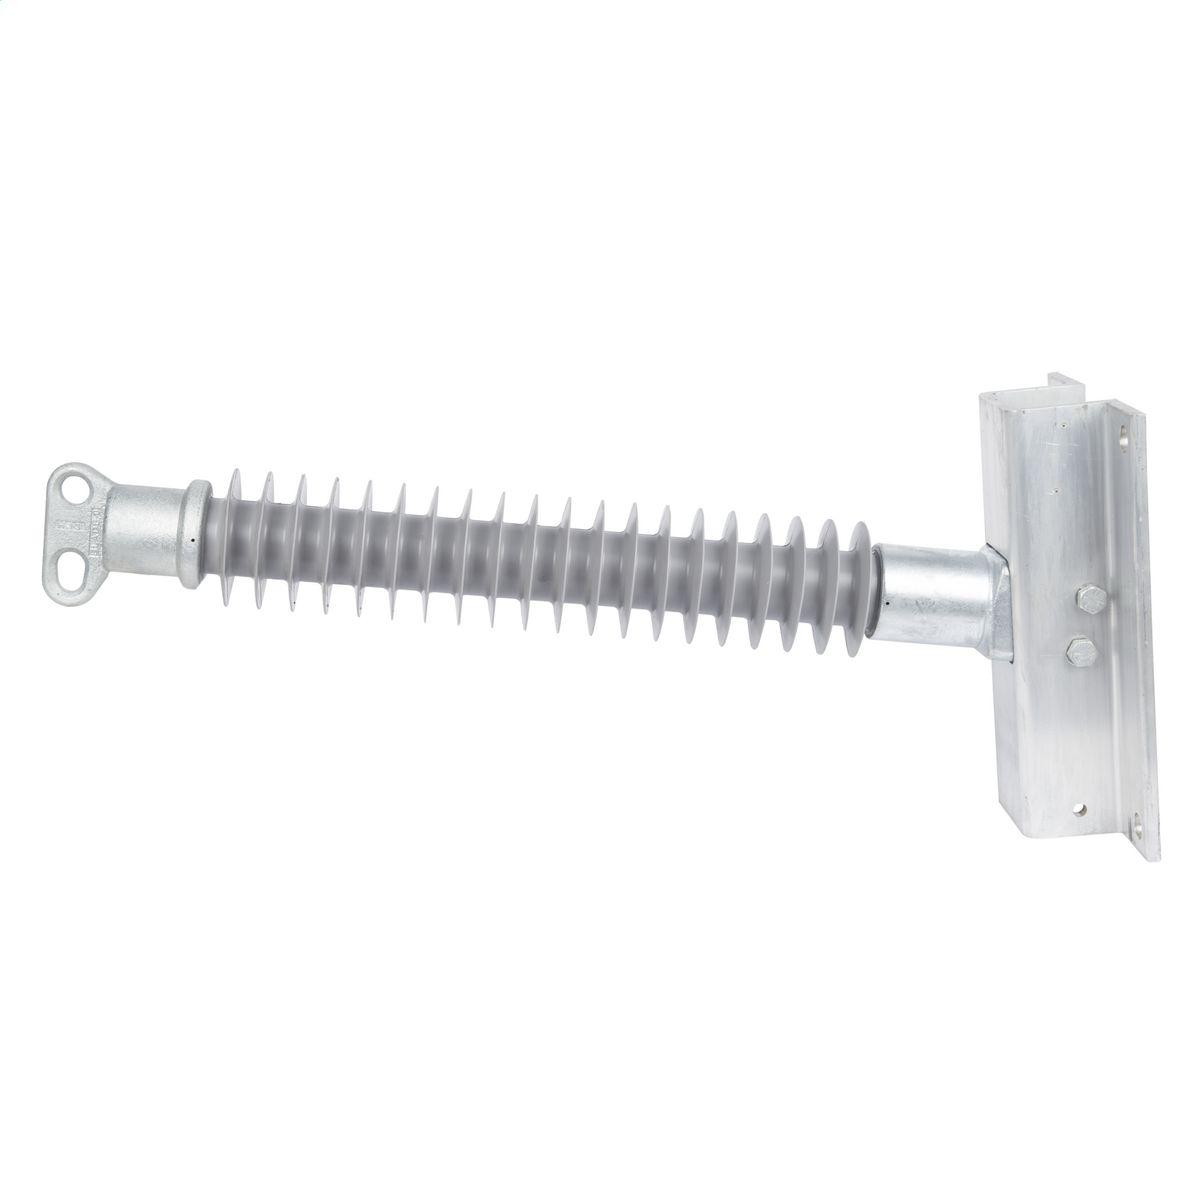 Hubbell P350118S0030 3.5" Line Post, 2 hole blade,Aluminum  flat base 9x13 - 7/8" bolts  ; Made from hydrophobic silicone polymer ; 